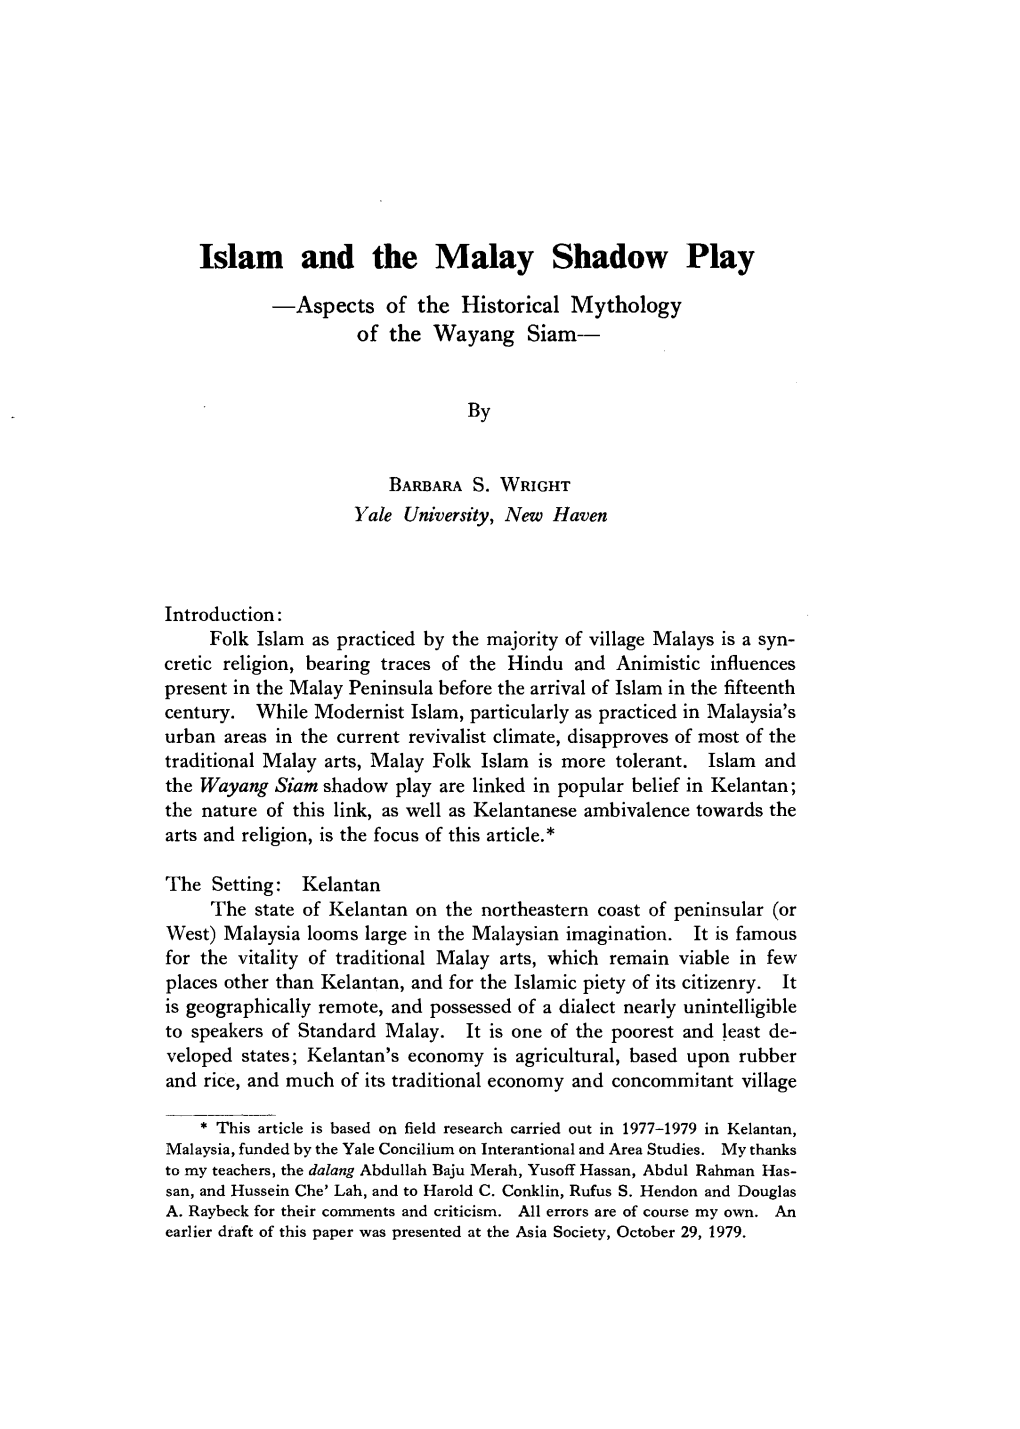 Islam and the Malay Shadow Play —Aspects of the Historical Mythology of the Wayang Siam